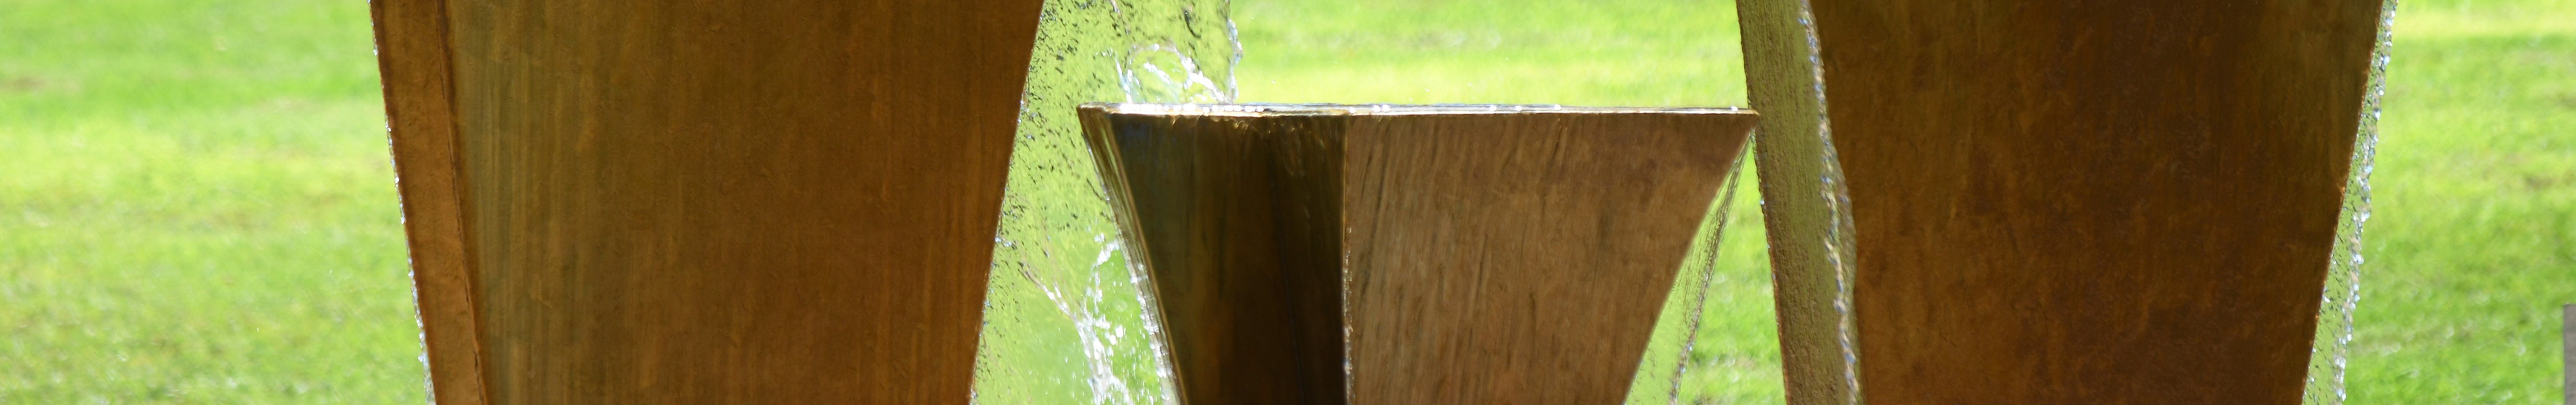 Cubic fountain on grassfield